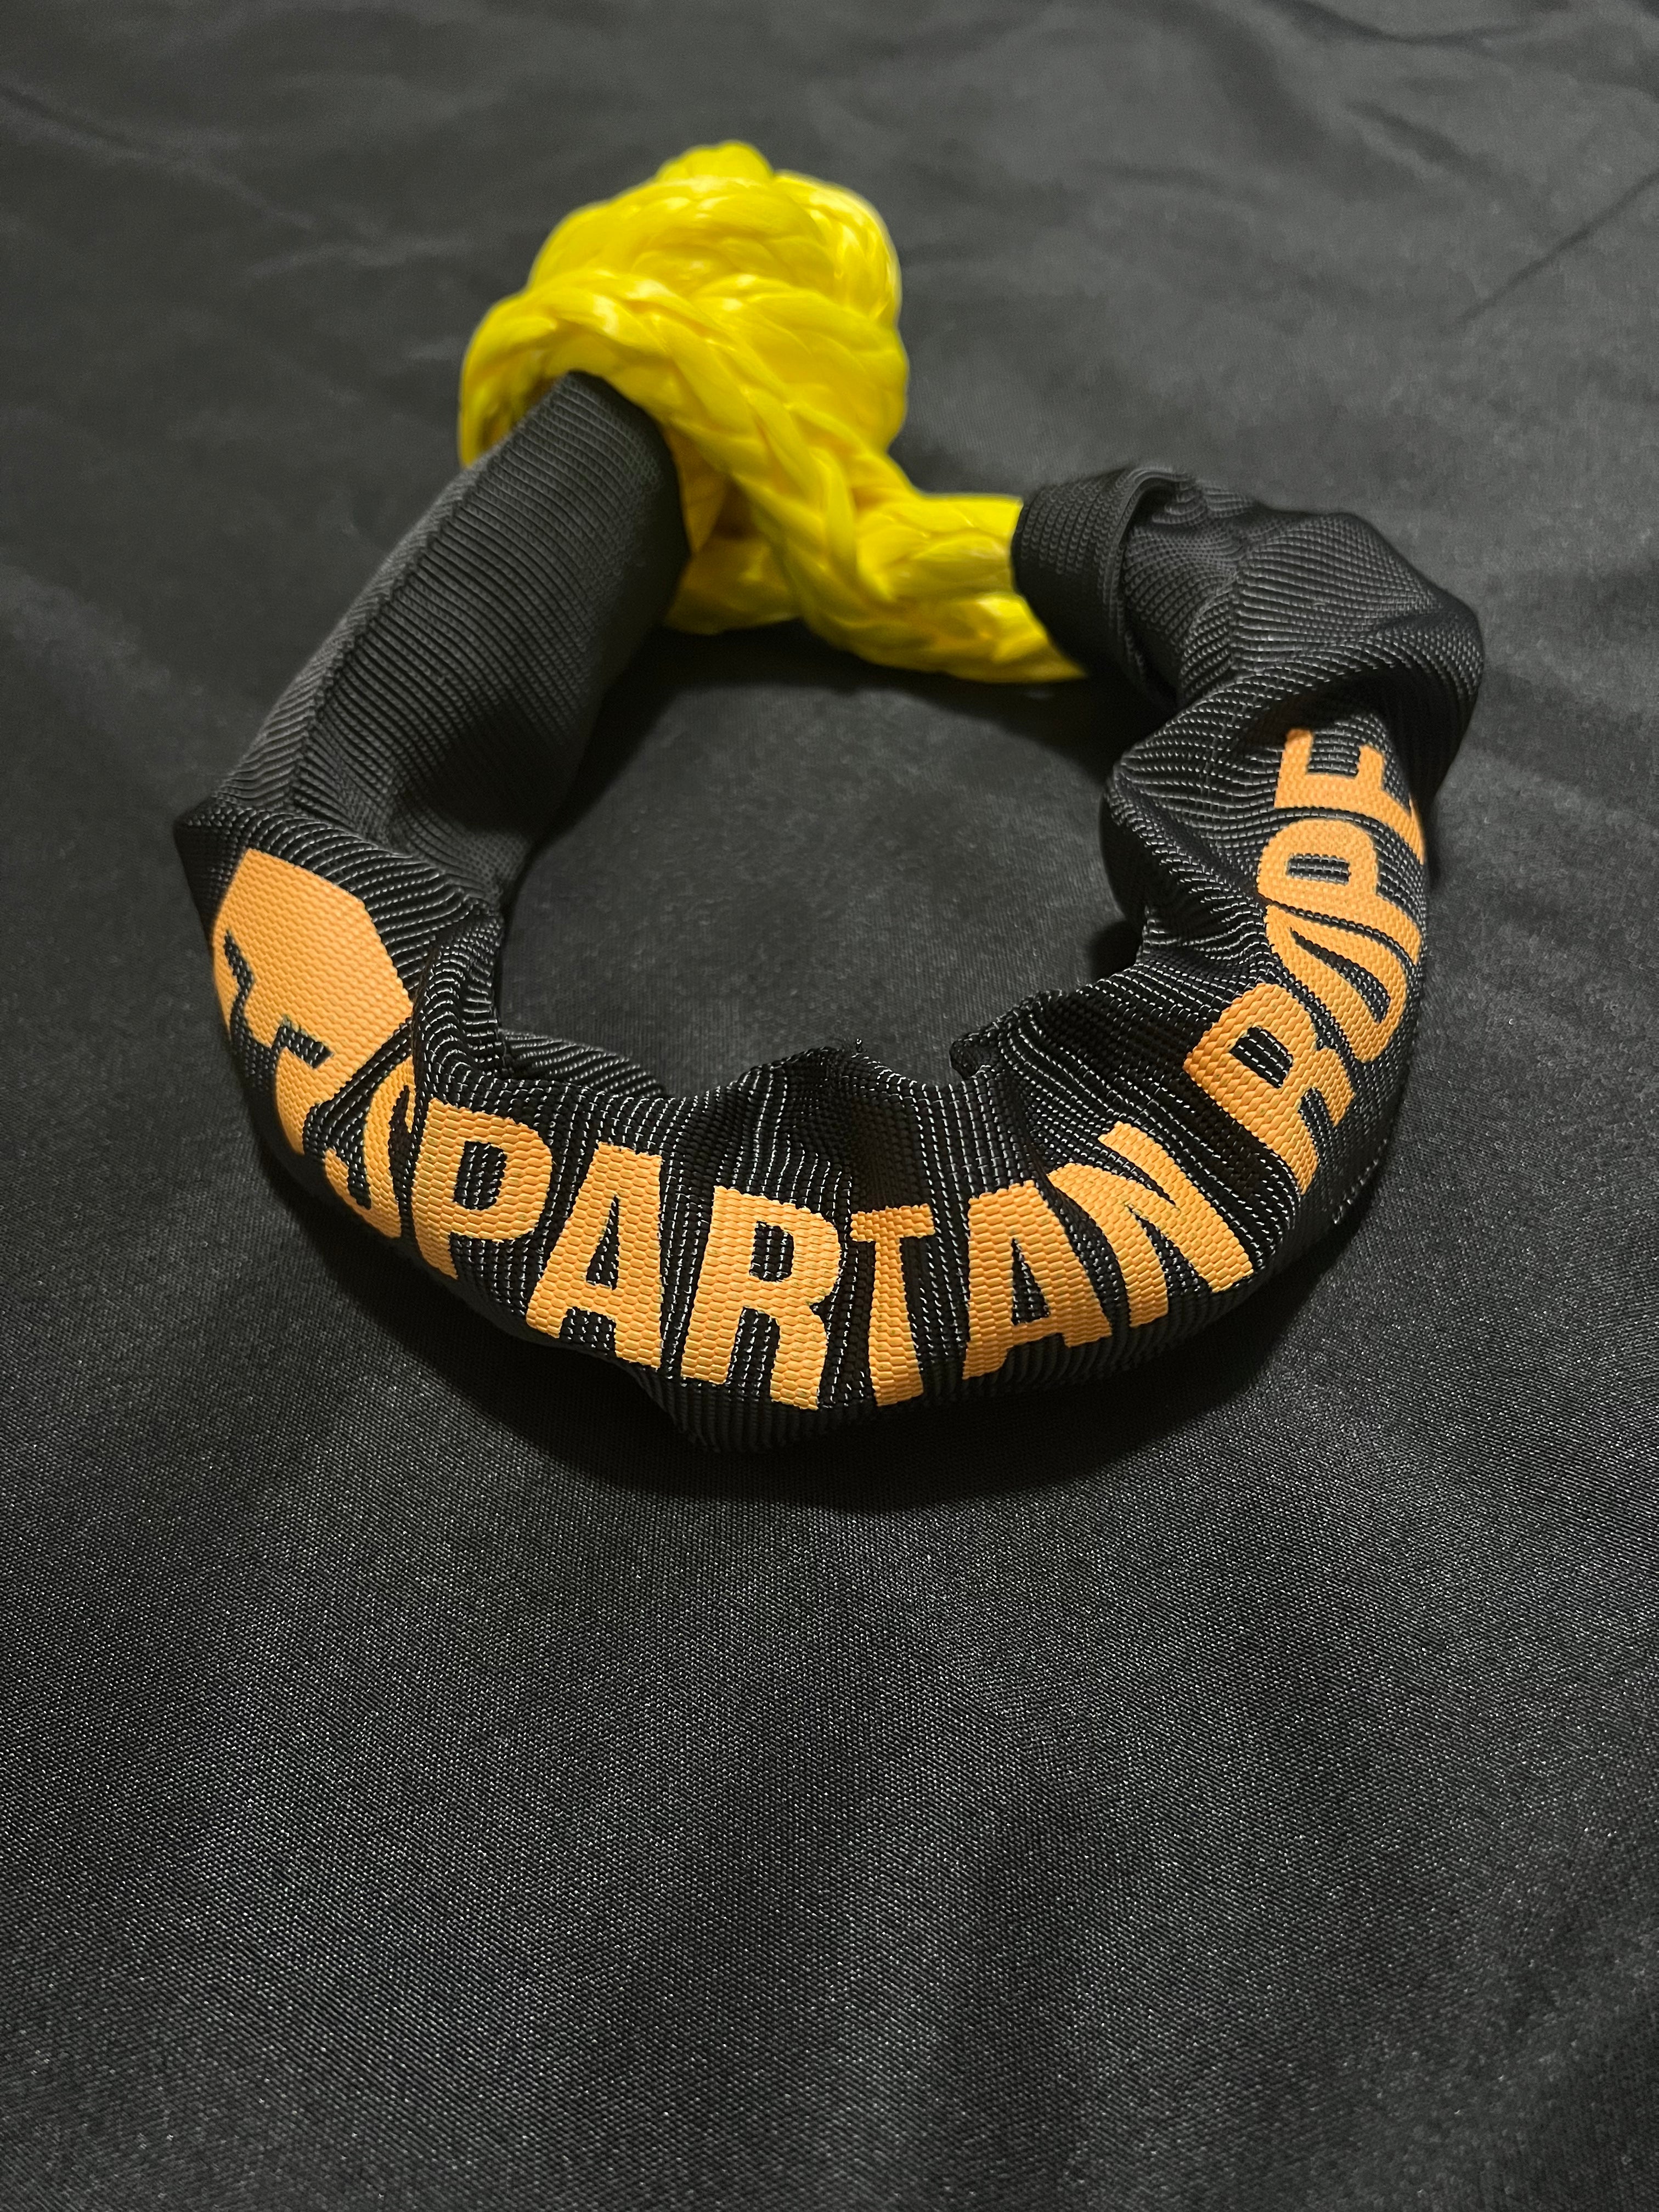 Soft Shackle – Spartan Rope